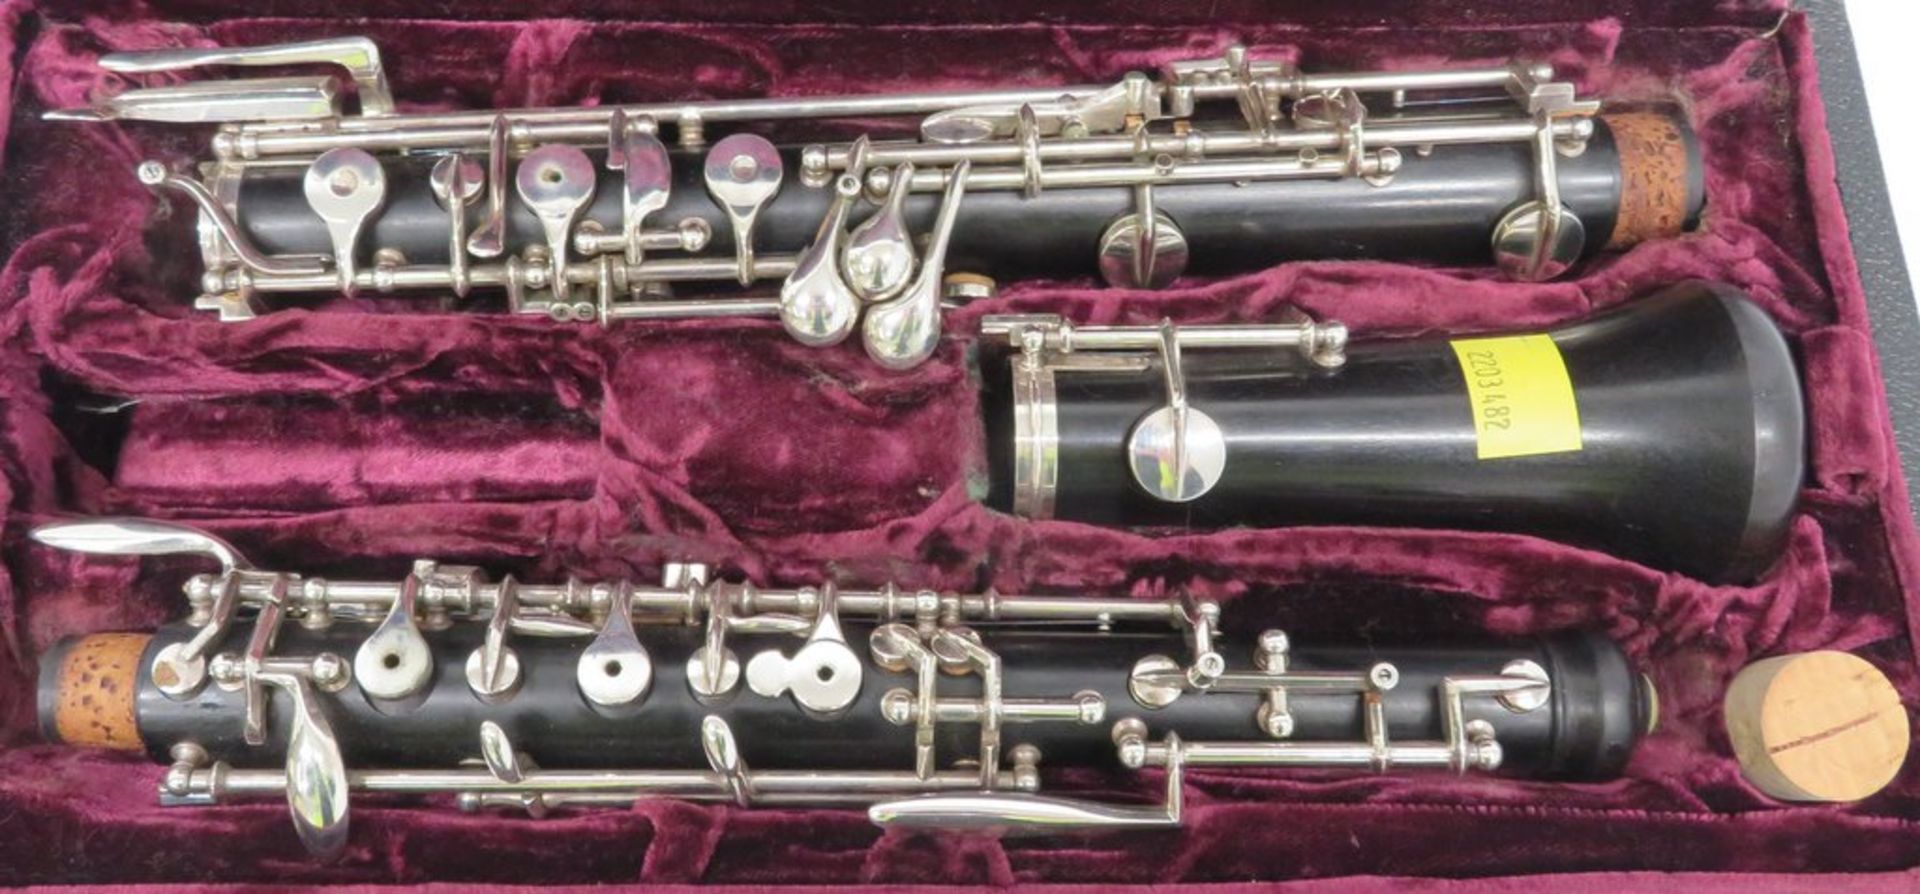 Buffet Crampon Oboe Complete With Case. - Image 2 of 15